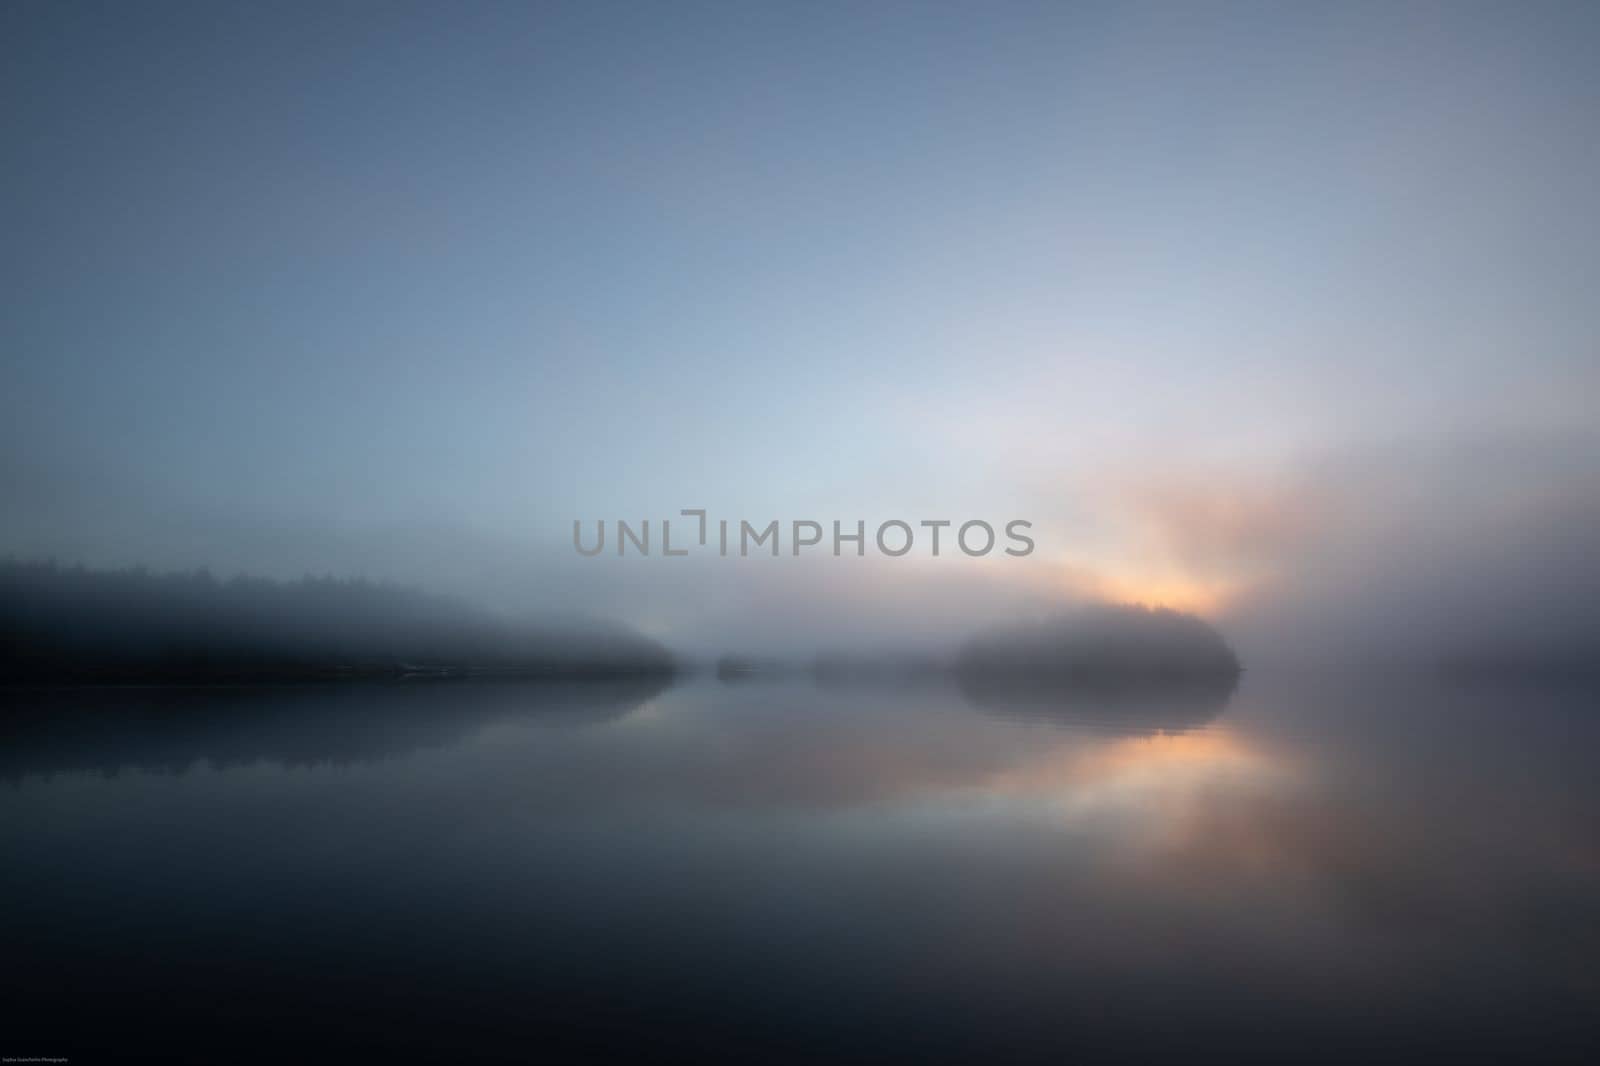 Morning mist with sun peeking through clouds and reflection in the water, Blunden Harbour, British Columbia by Granchinho